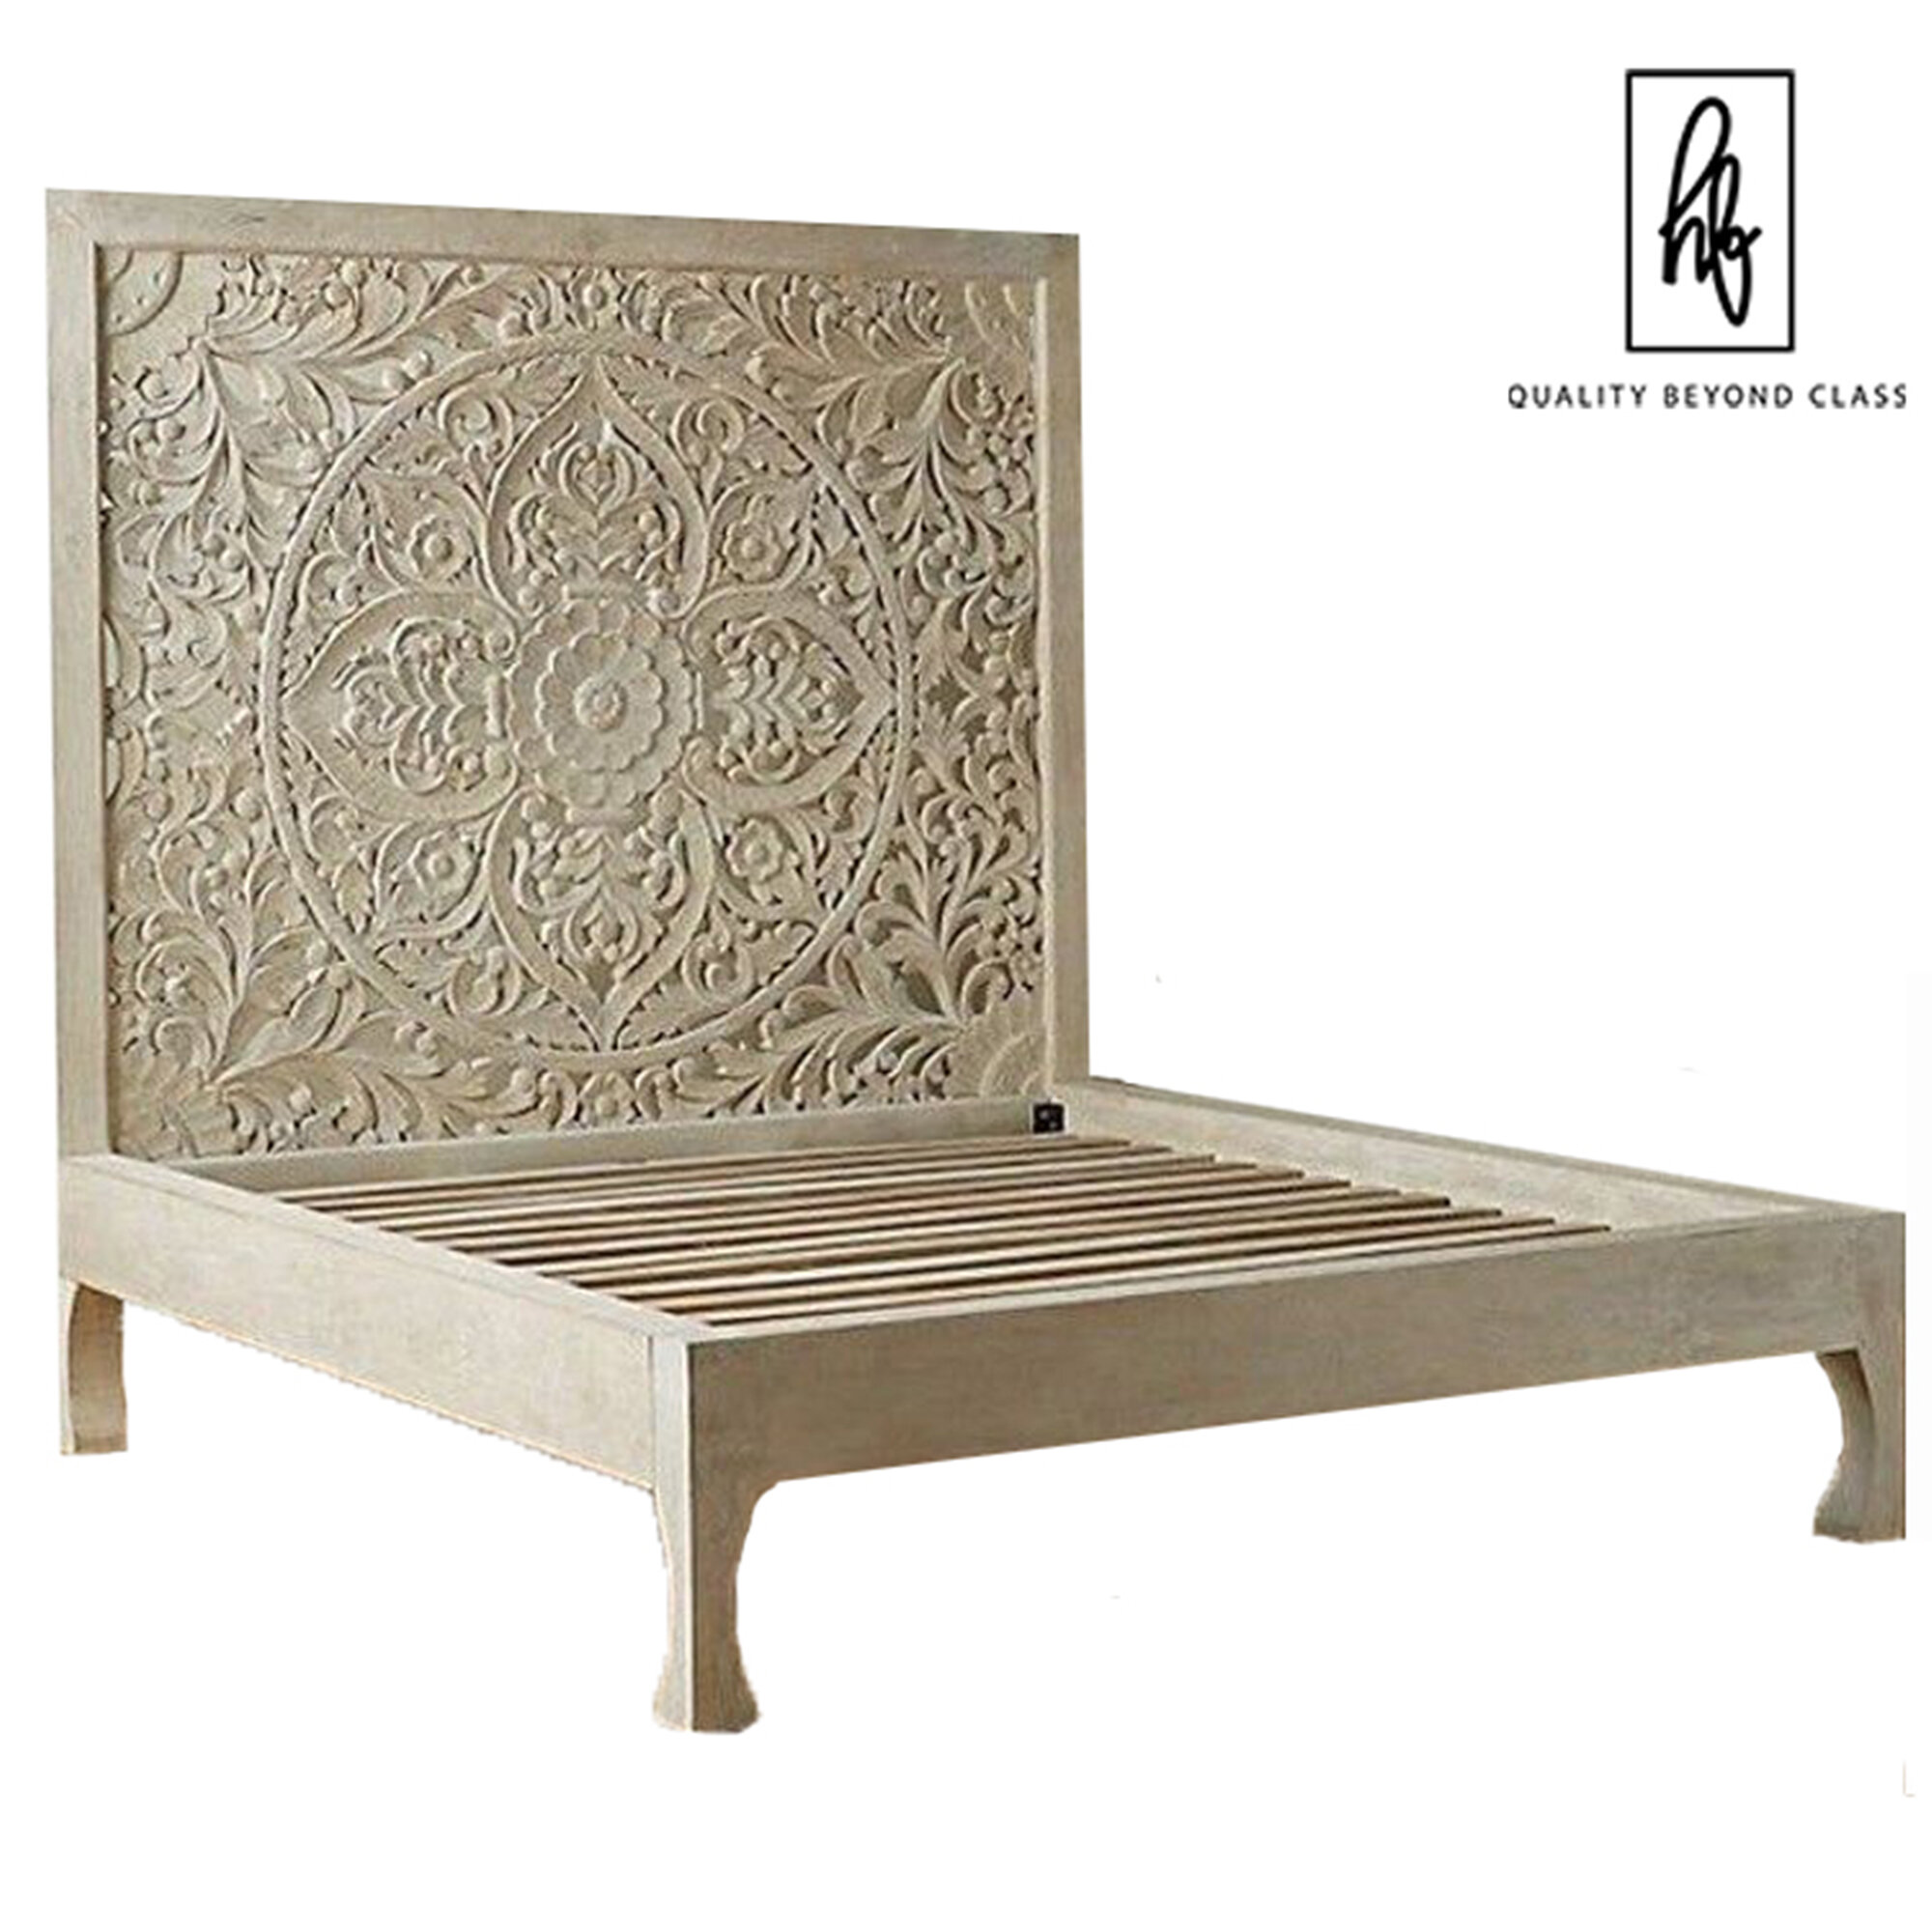 Hand-carved Solid Wood Queen King Bed Headboard Headboards 